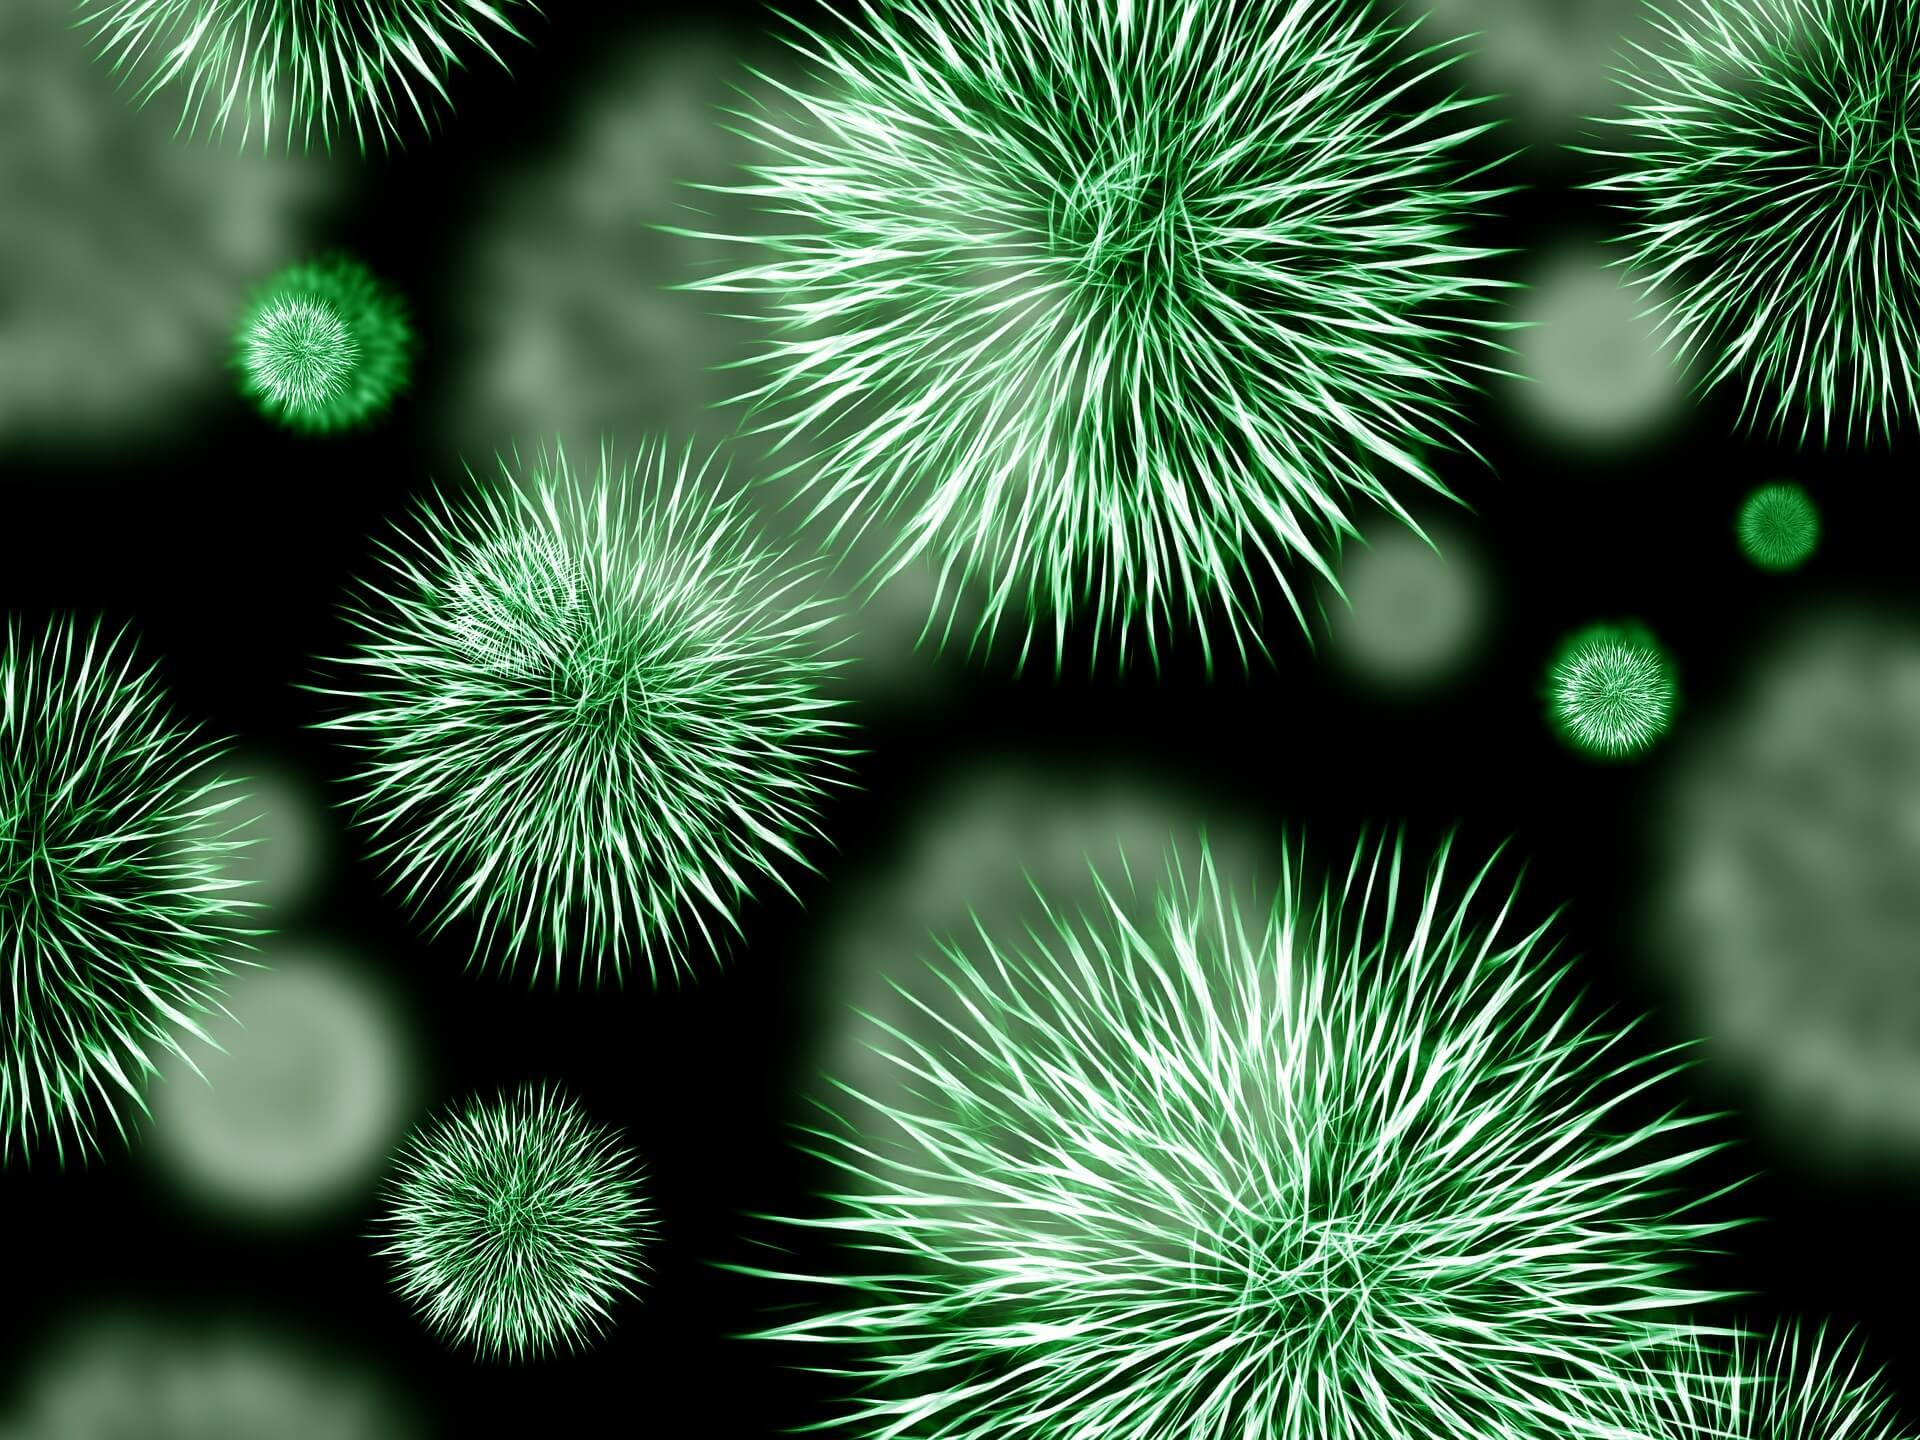 Viruses do not respond to antibiotics. They should only be used to treat bacterial infections.